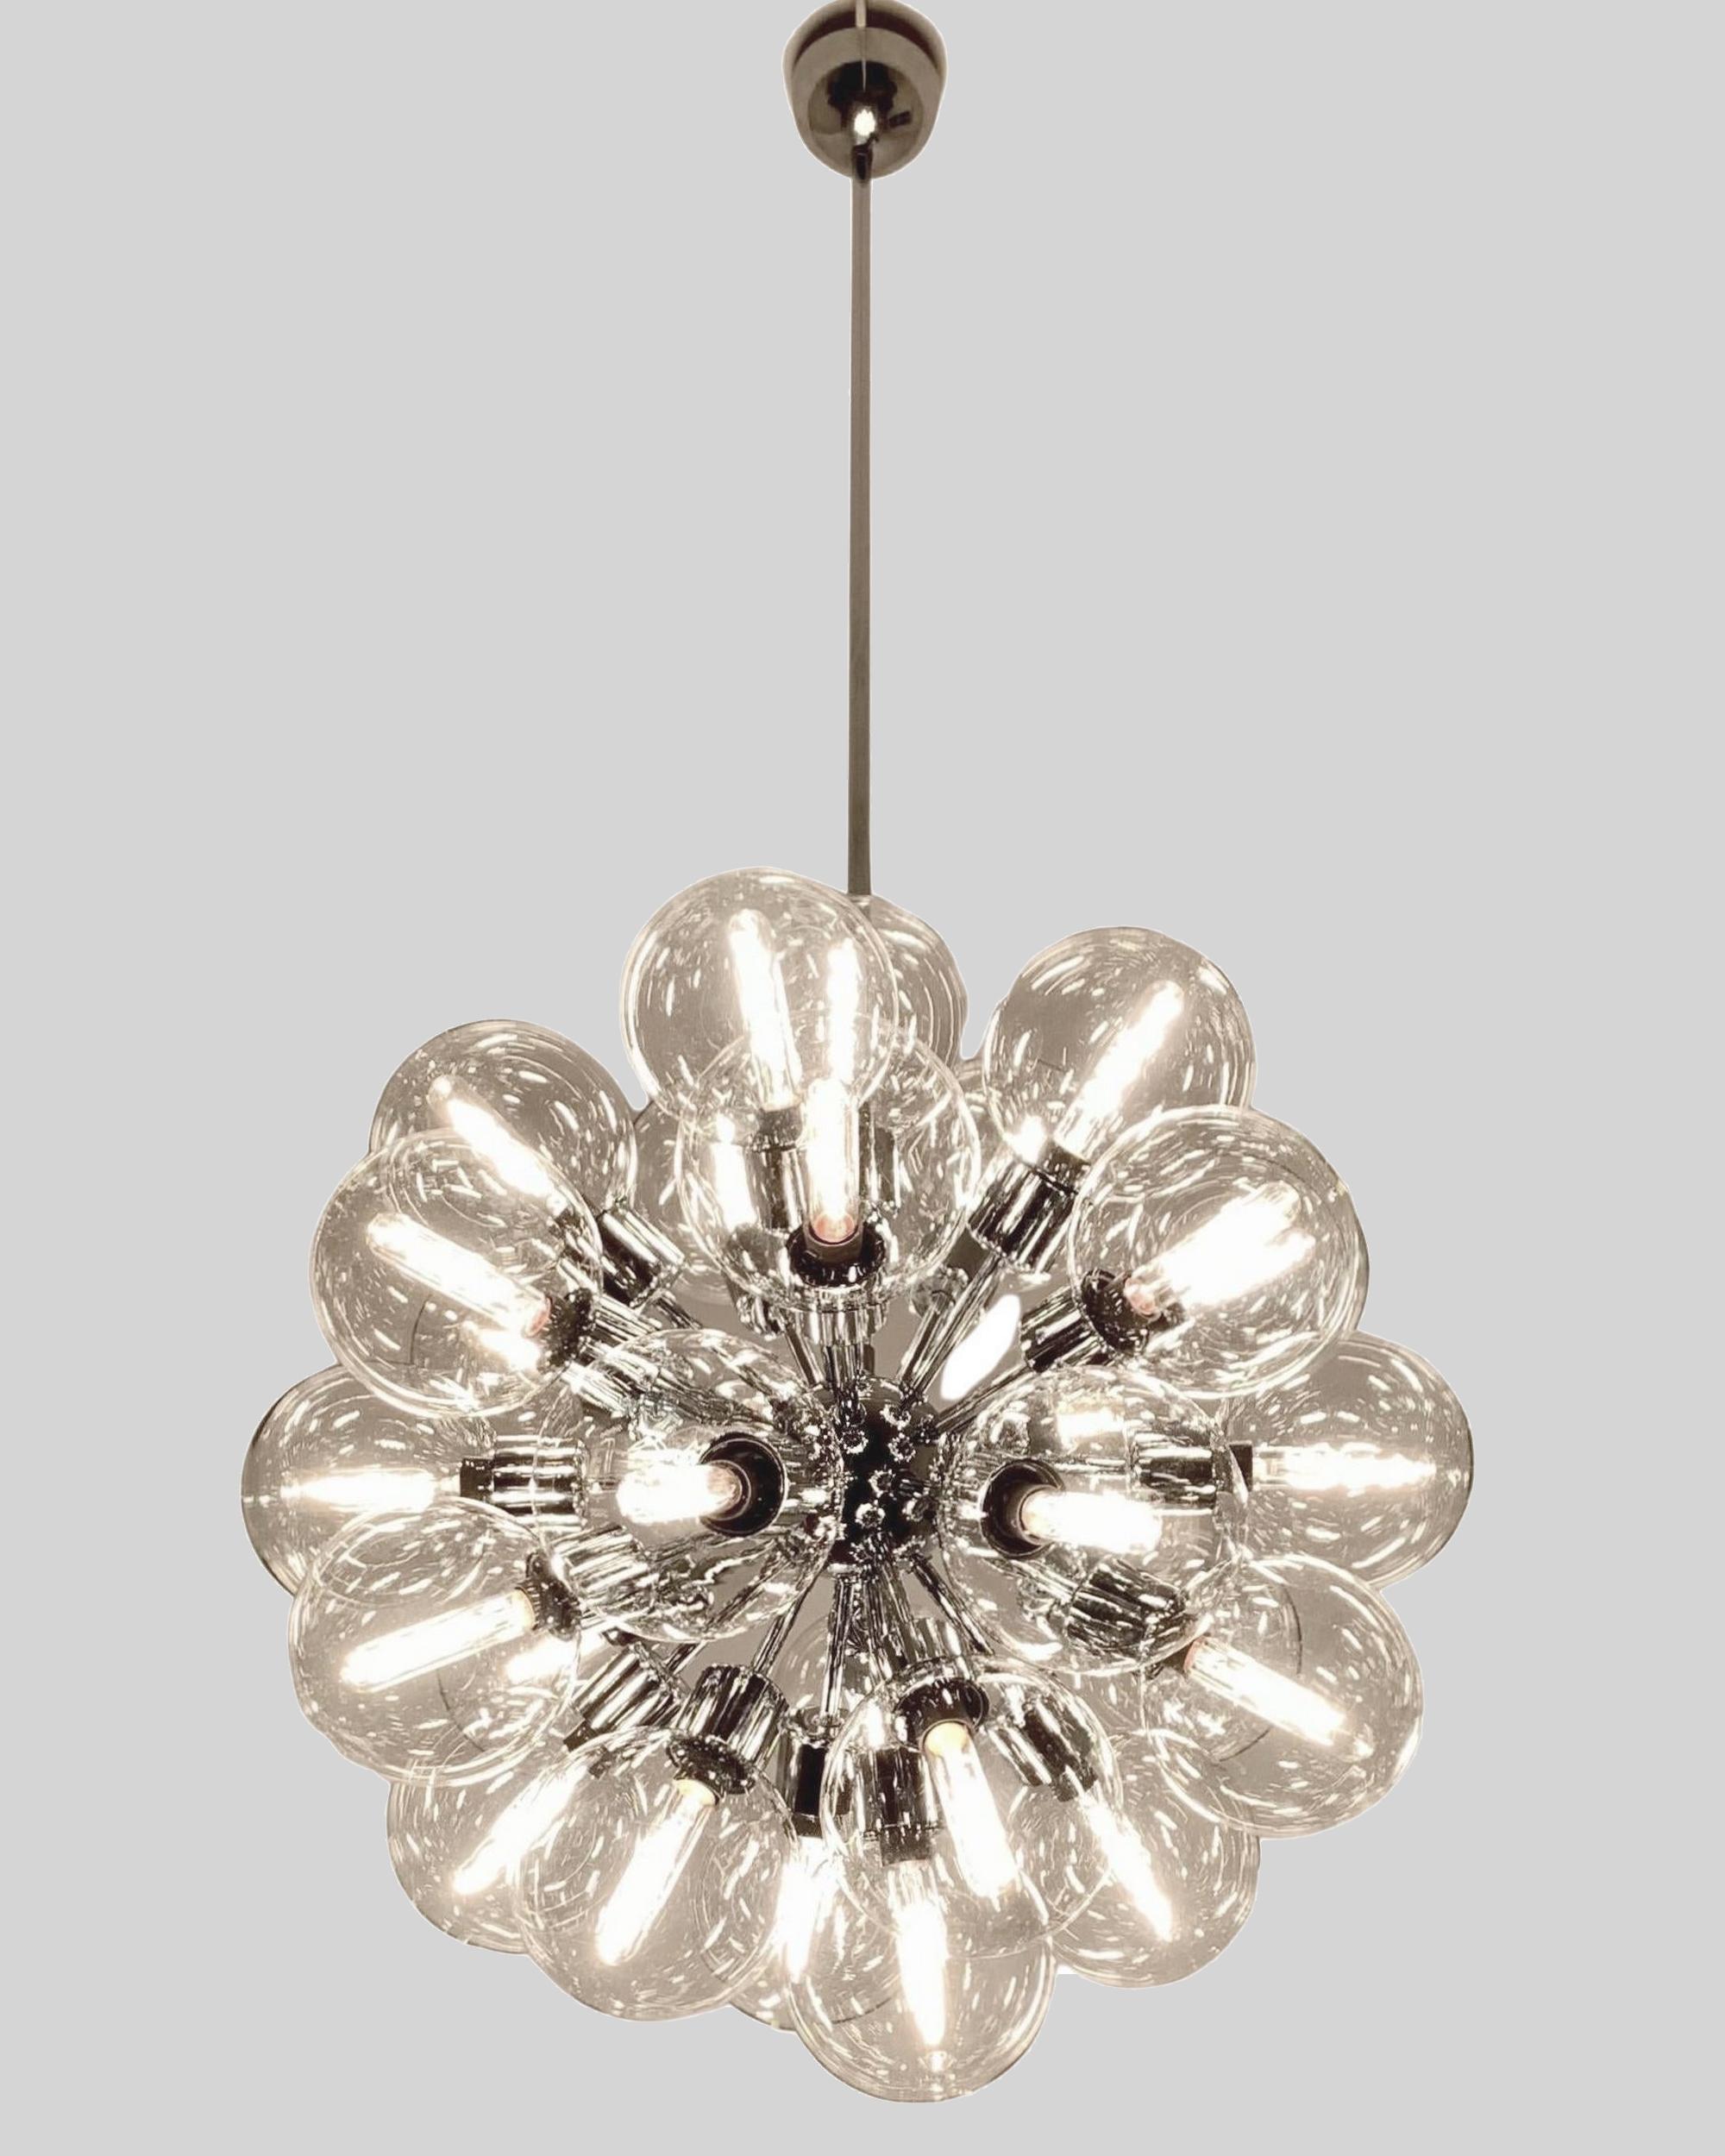 Pair of chandeliers designed by Motoko Ishii and produced by Staff Leuchten in Germany, distributed by Lightolier in the USA.
Twenty-eight original blown glass globes and chromed metal structure.
Can be sold separately.